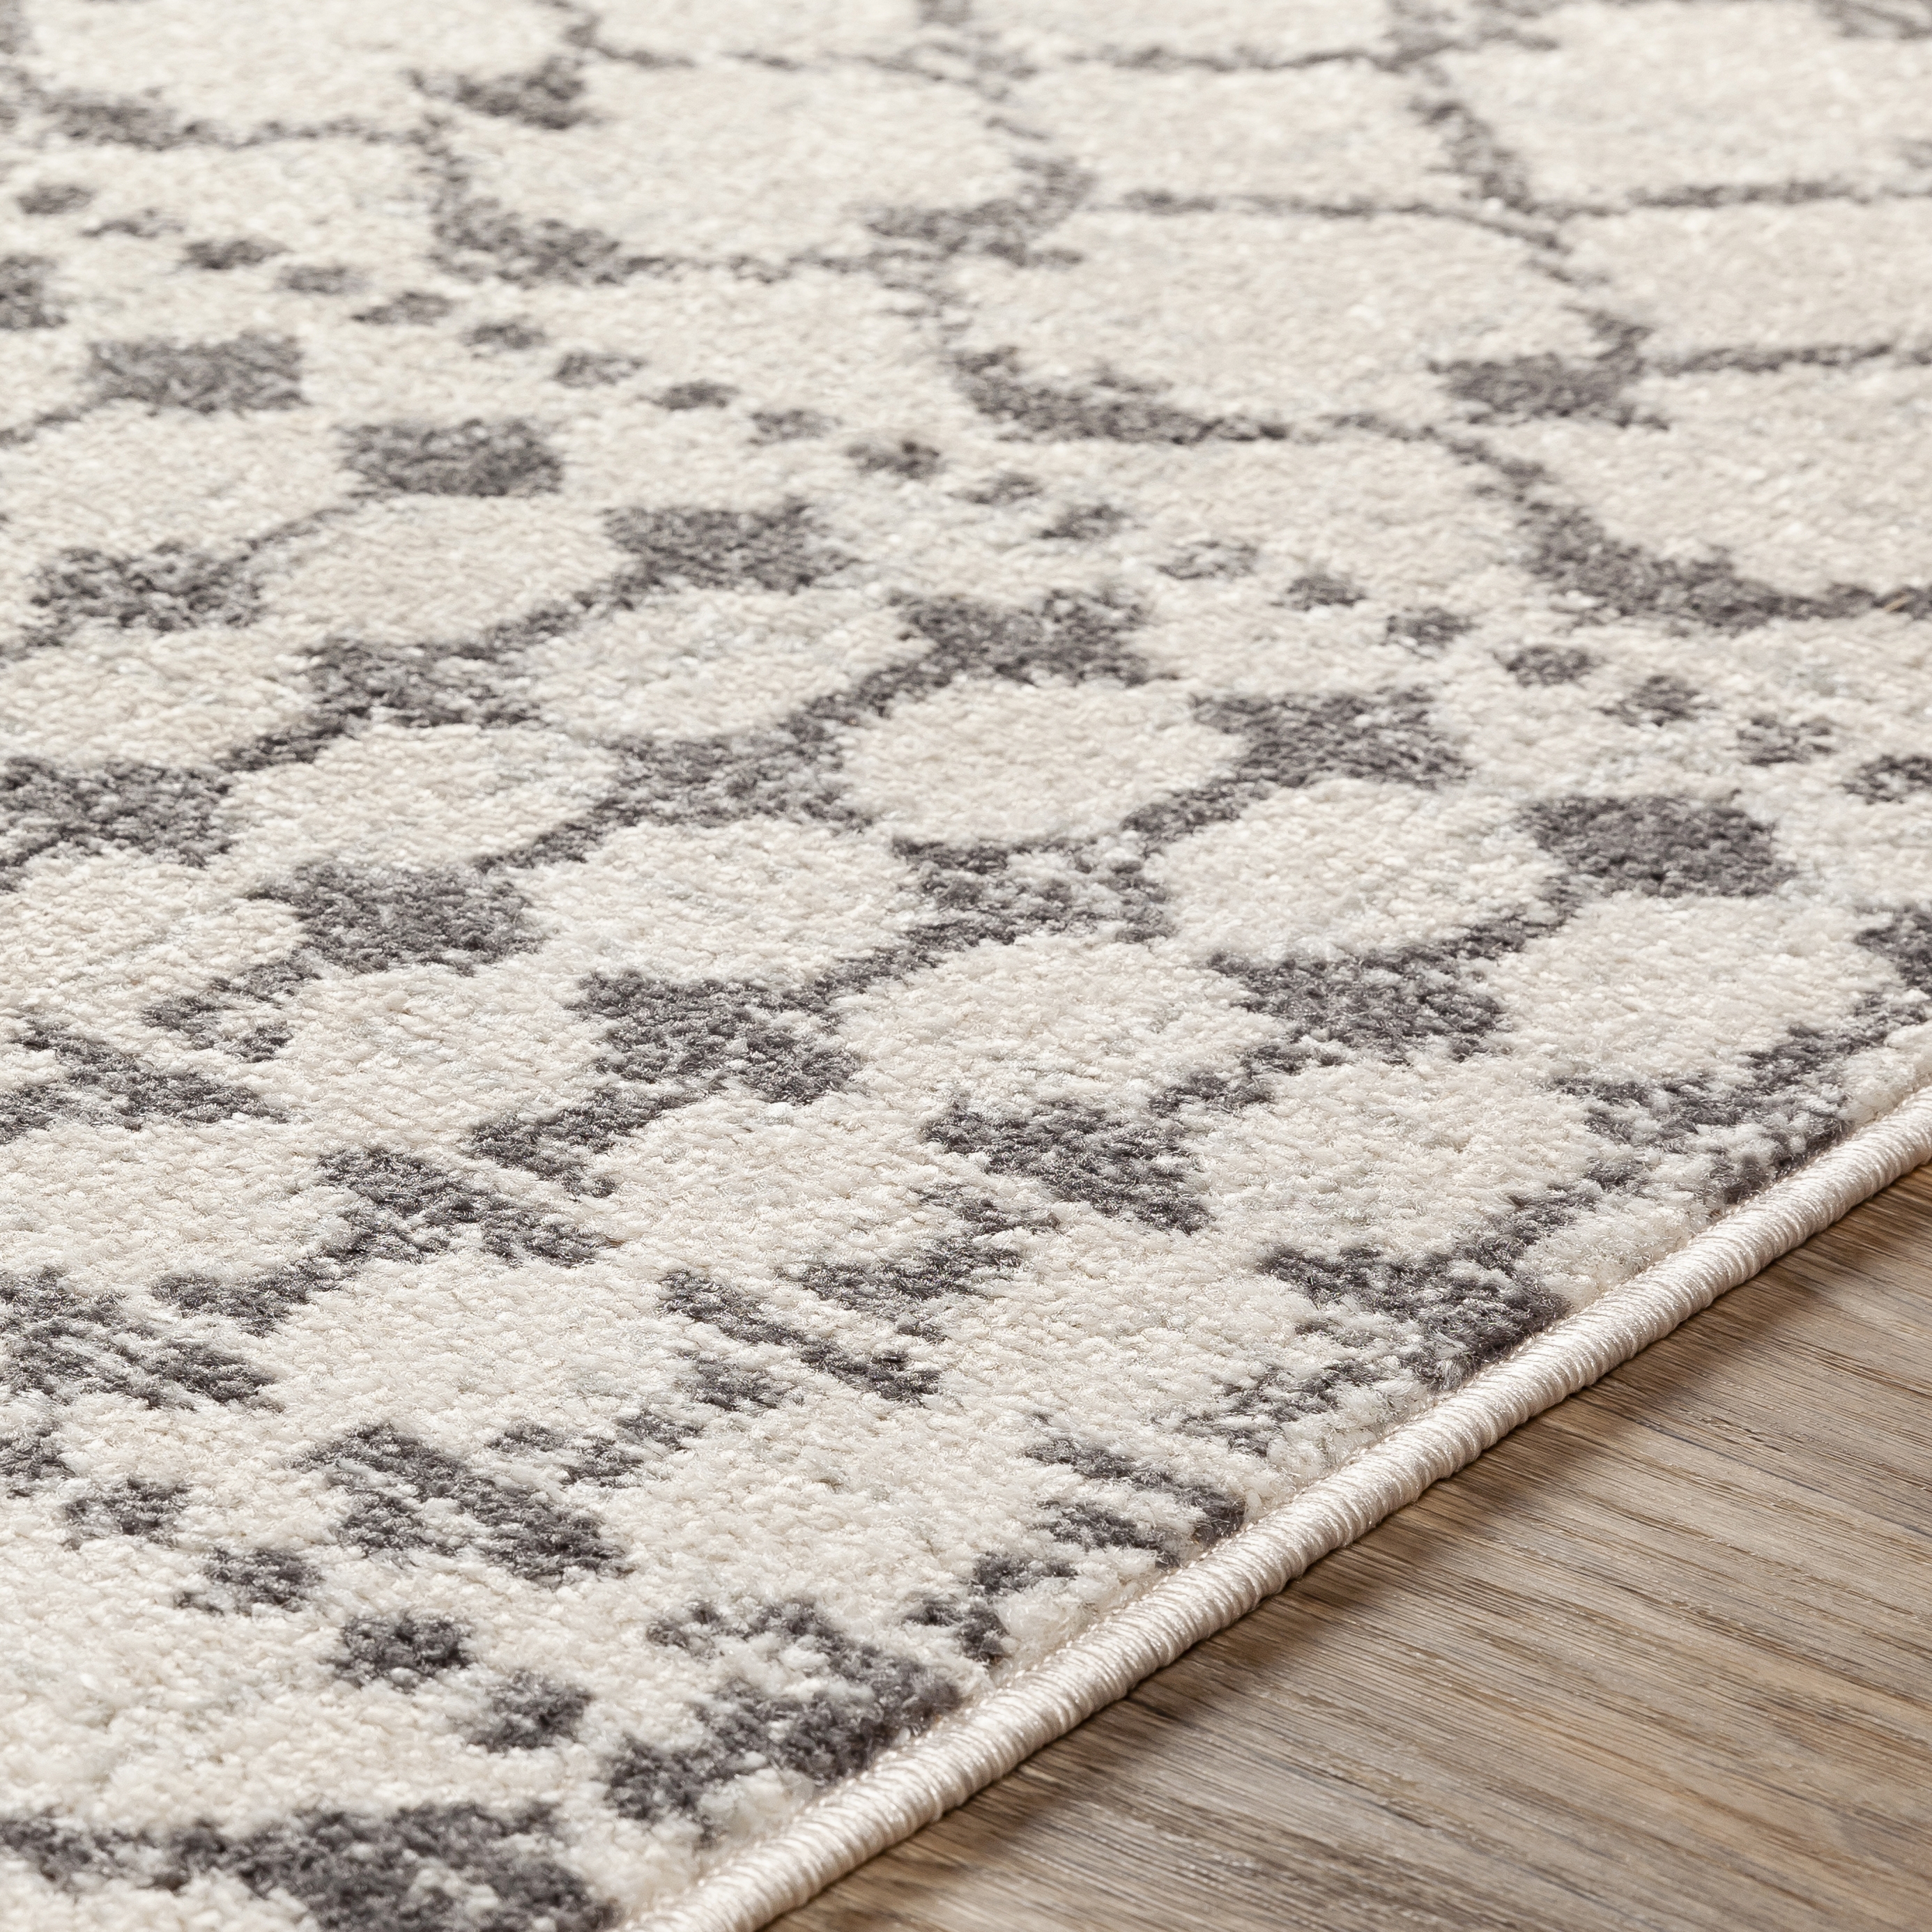 Chester Rug, 8'10" x 12' - Image 3